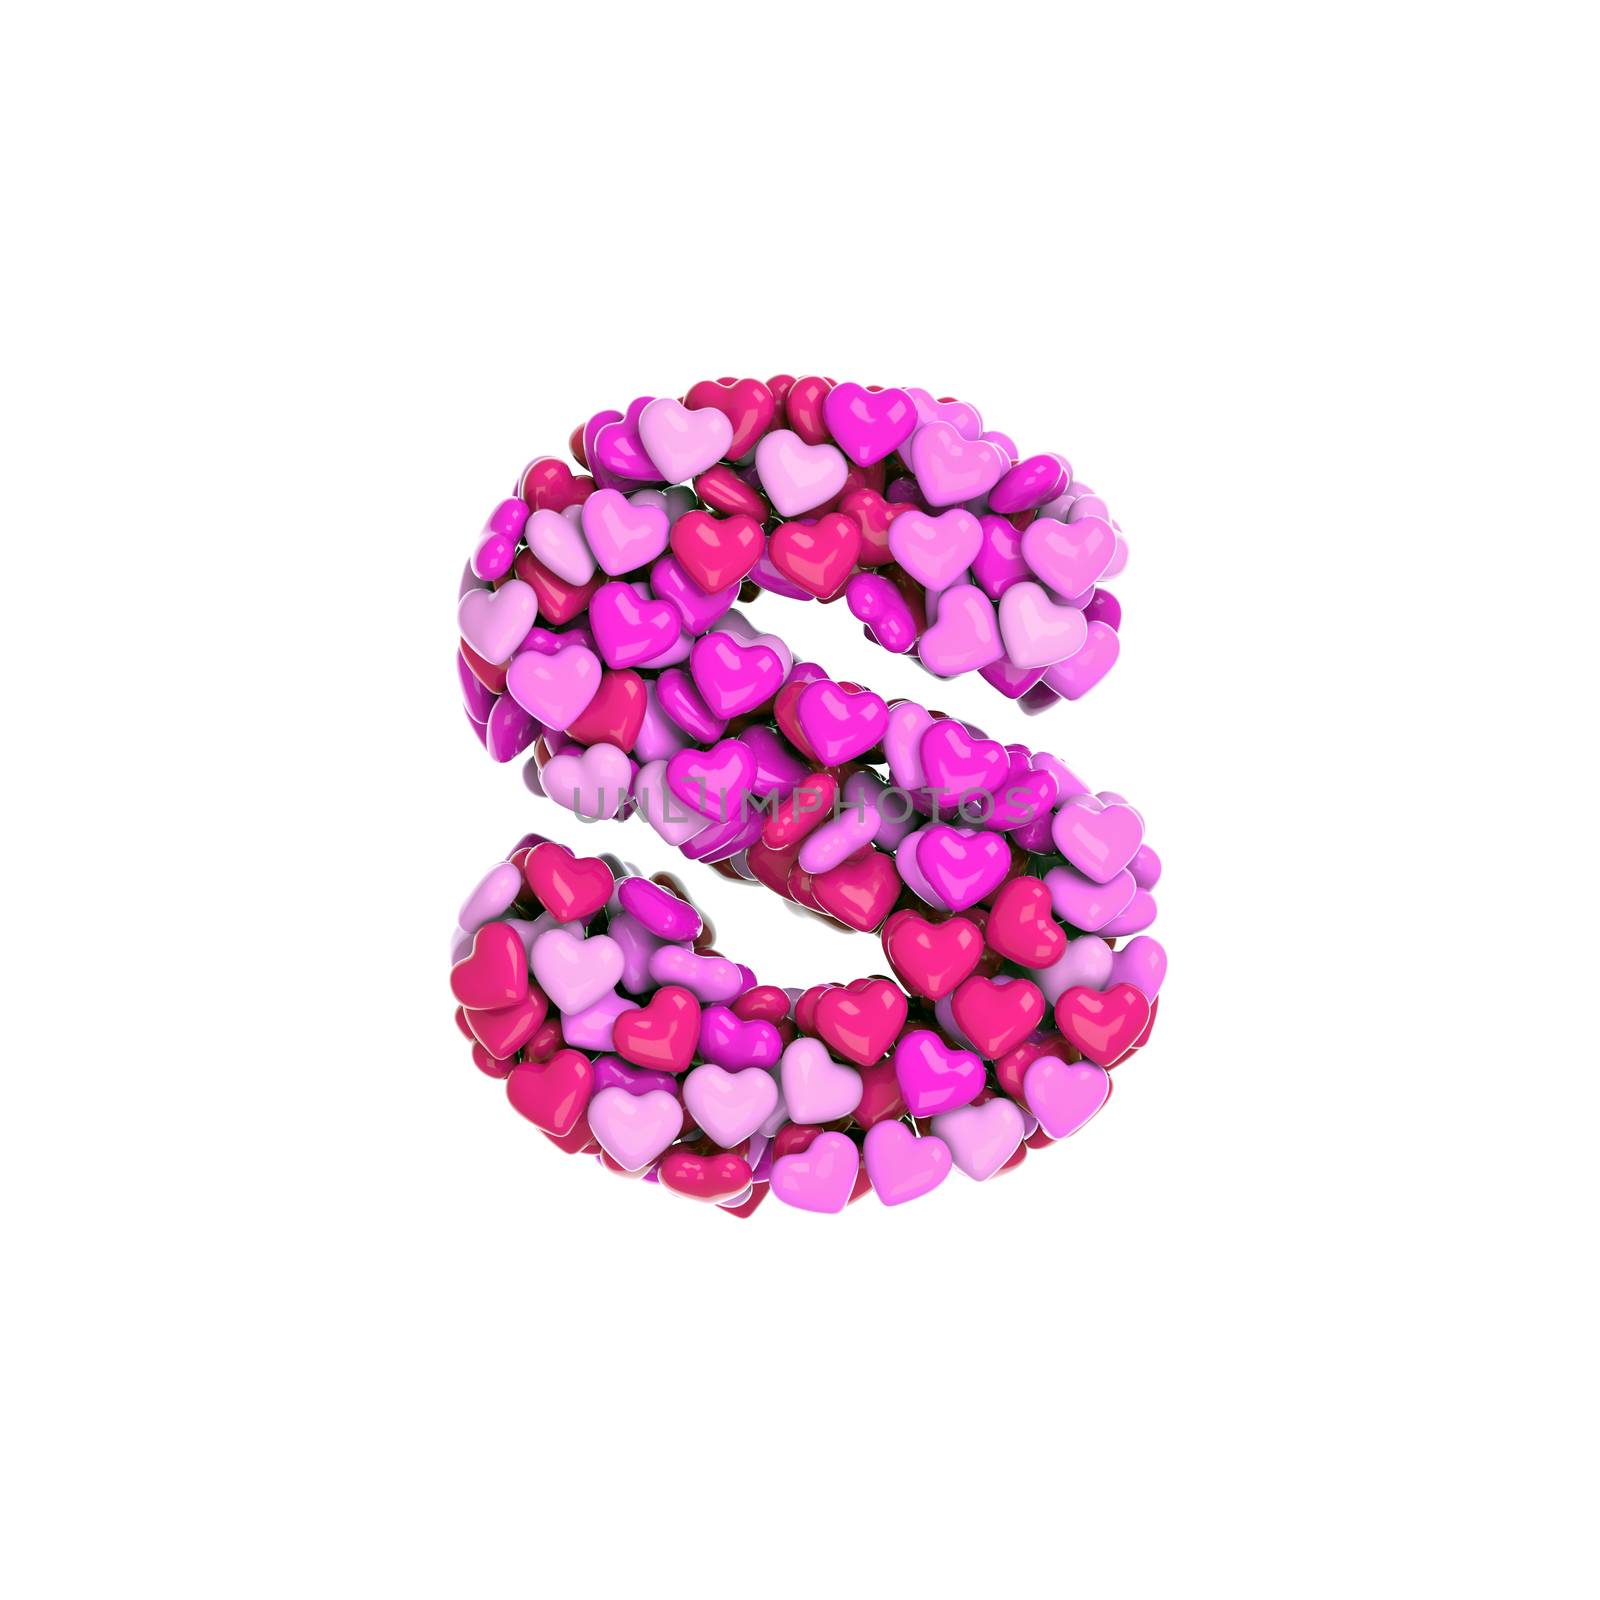 Valentine letter S - Small 3d pink hearts font isolated on white background. This alphabet is perfect for creative illustrations related but not limited to Love, passion, wedding...